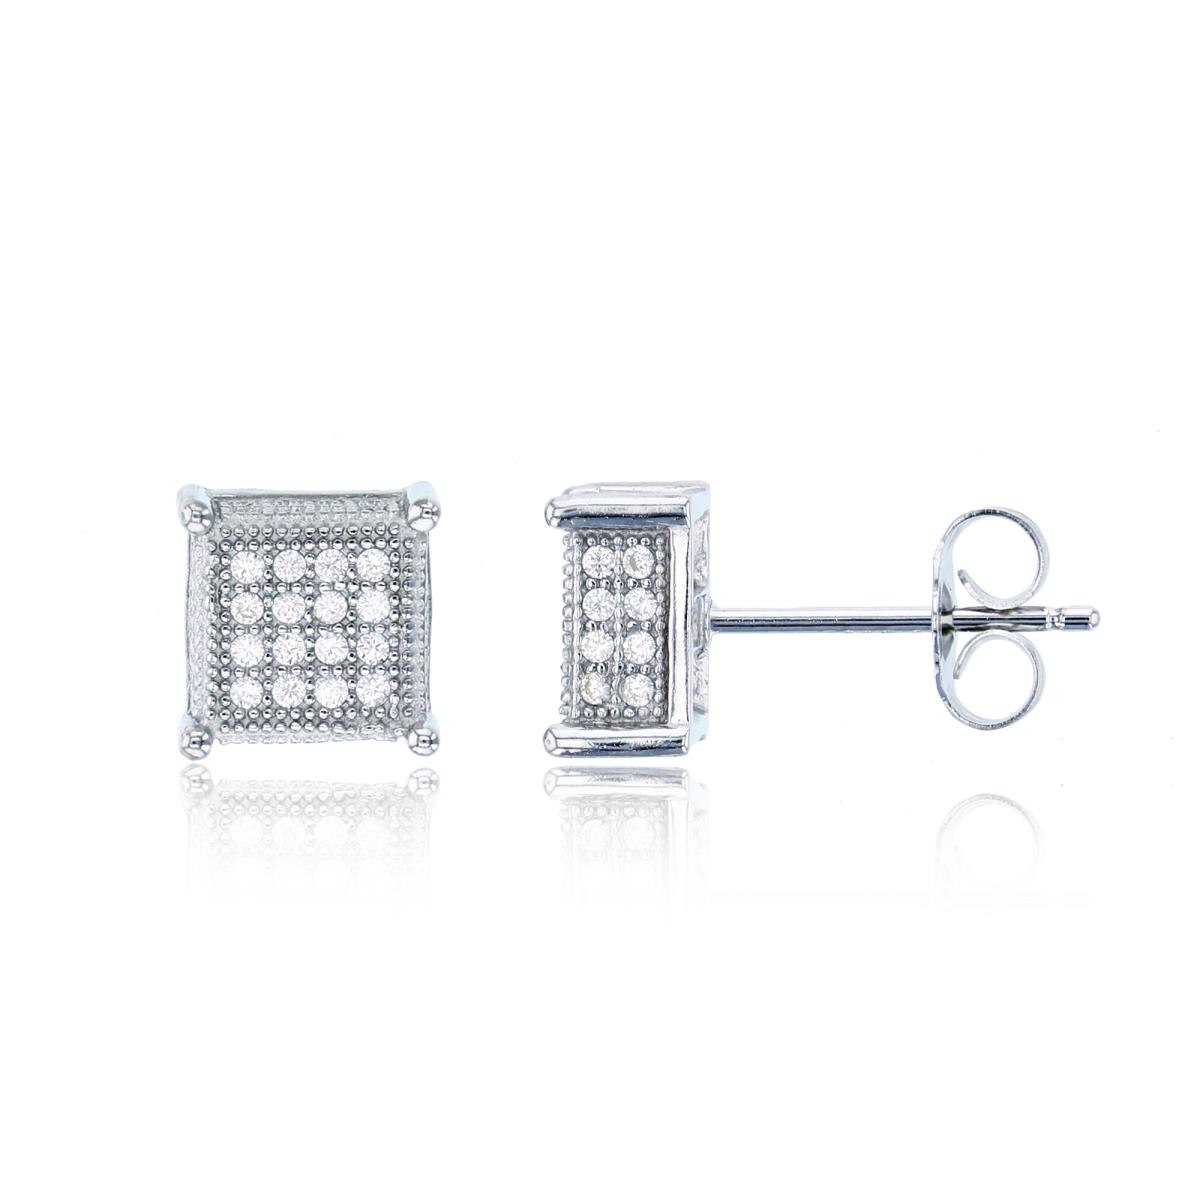 Sterling Silver Rhodium 8x8mm 3D Square Micropave Stud Earring